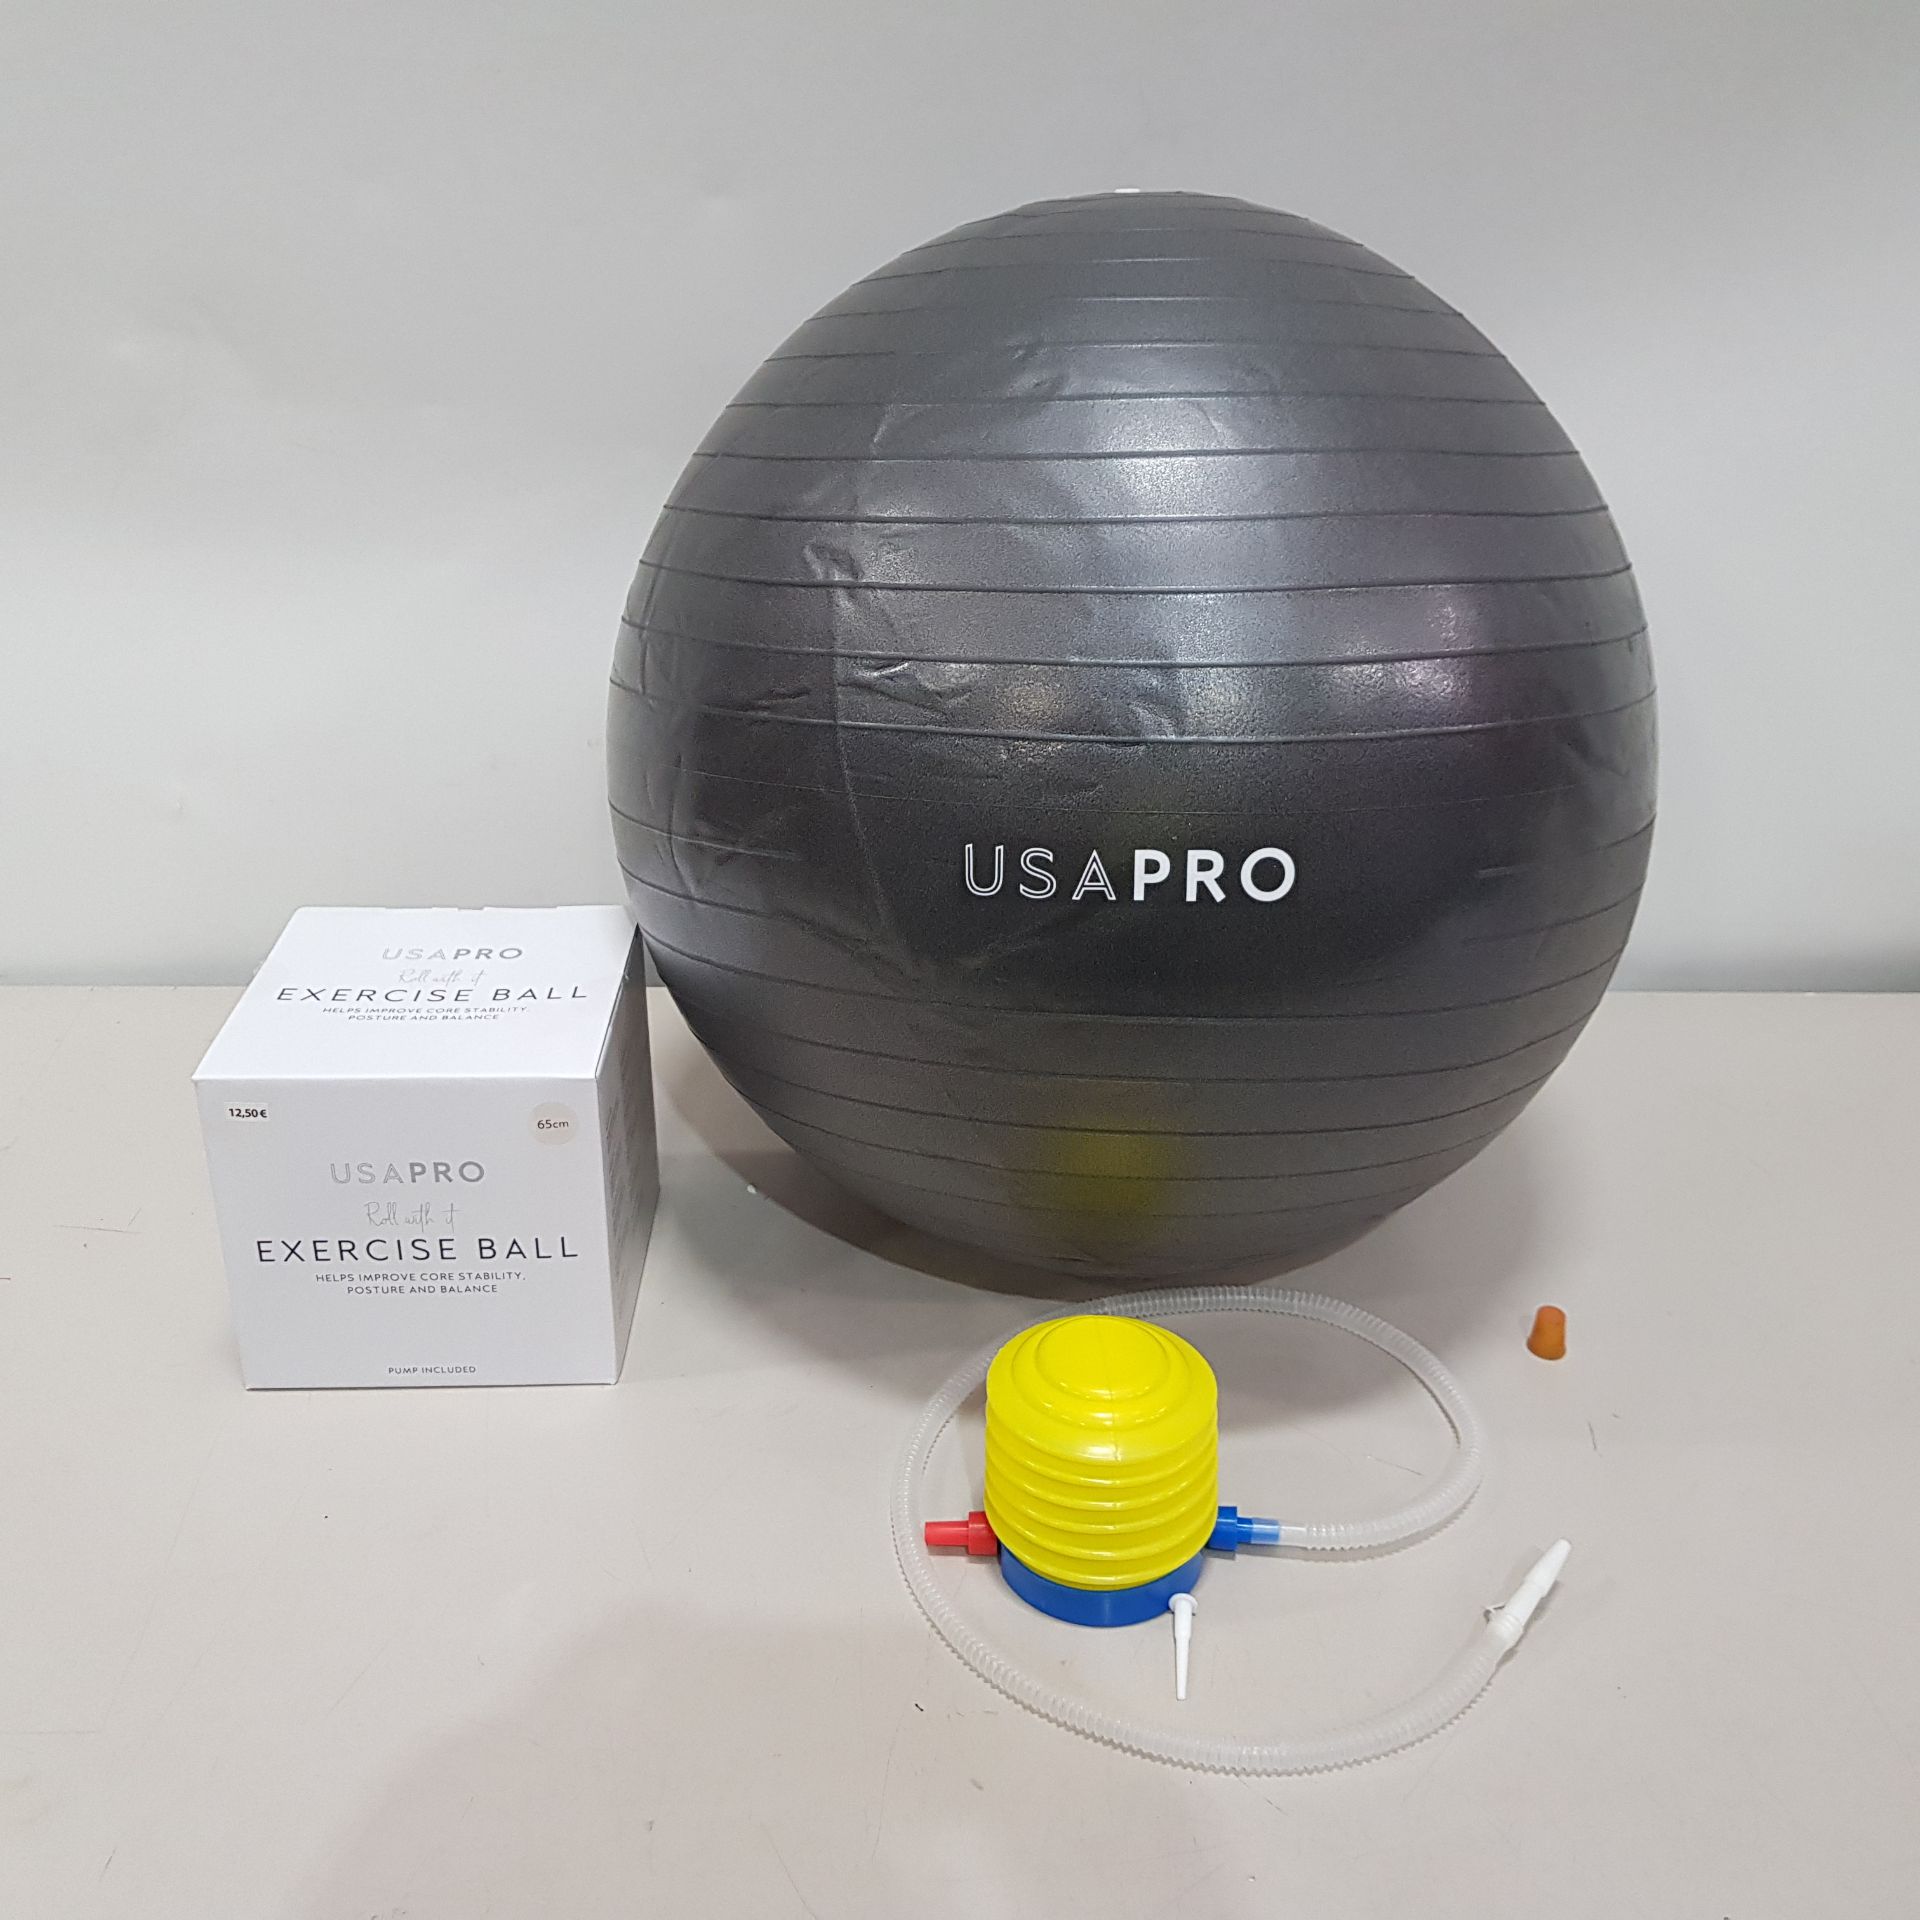 60 X BRAND NEW USA PRO YOGA BALLS IN GREY - INCLUDES PUMP - IN MIXED SIZES TO INLCLUDE 55 CM / 65 CM